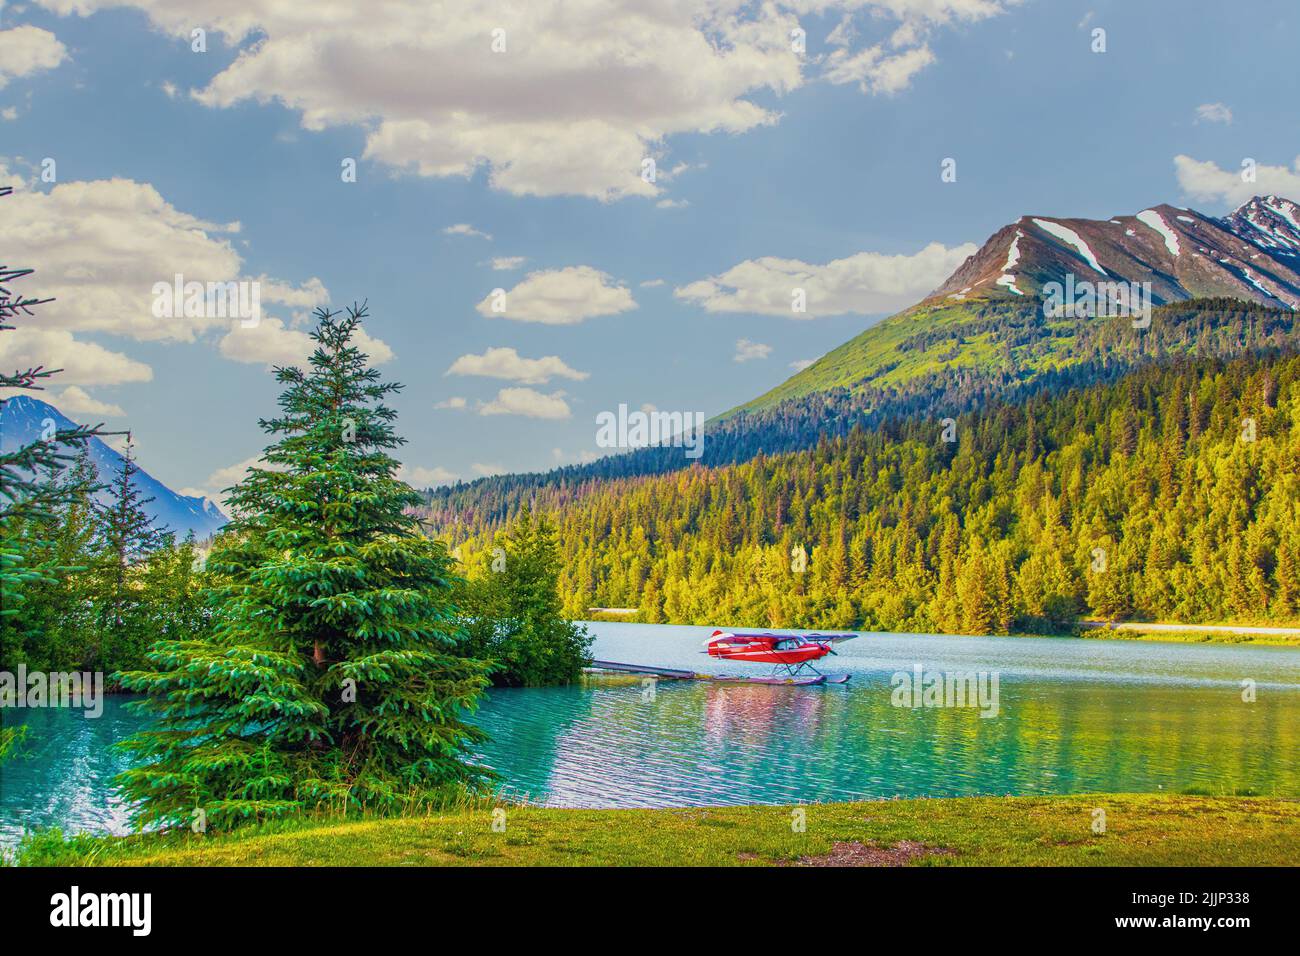 Red sea plane on lake in Moose Pass, Alaska in evening sunshine with mountains in background and surrounded by evergreen trees Stock Photo